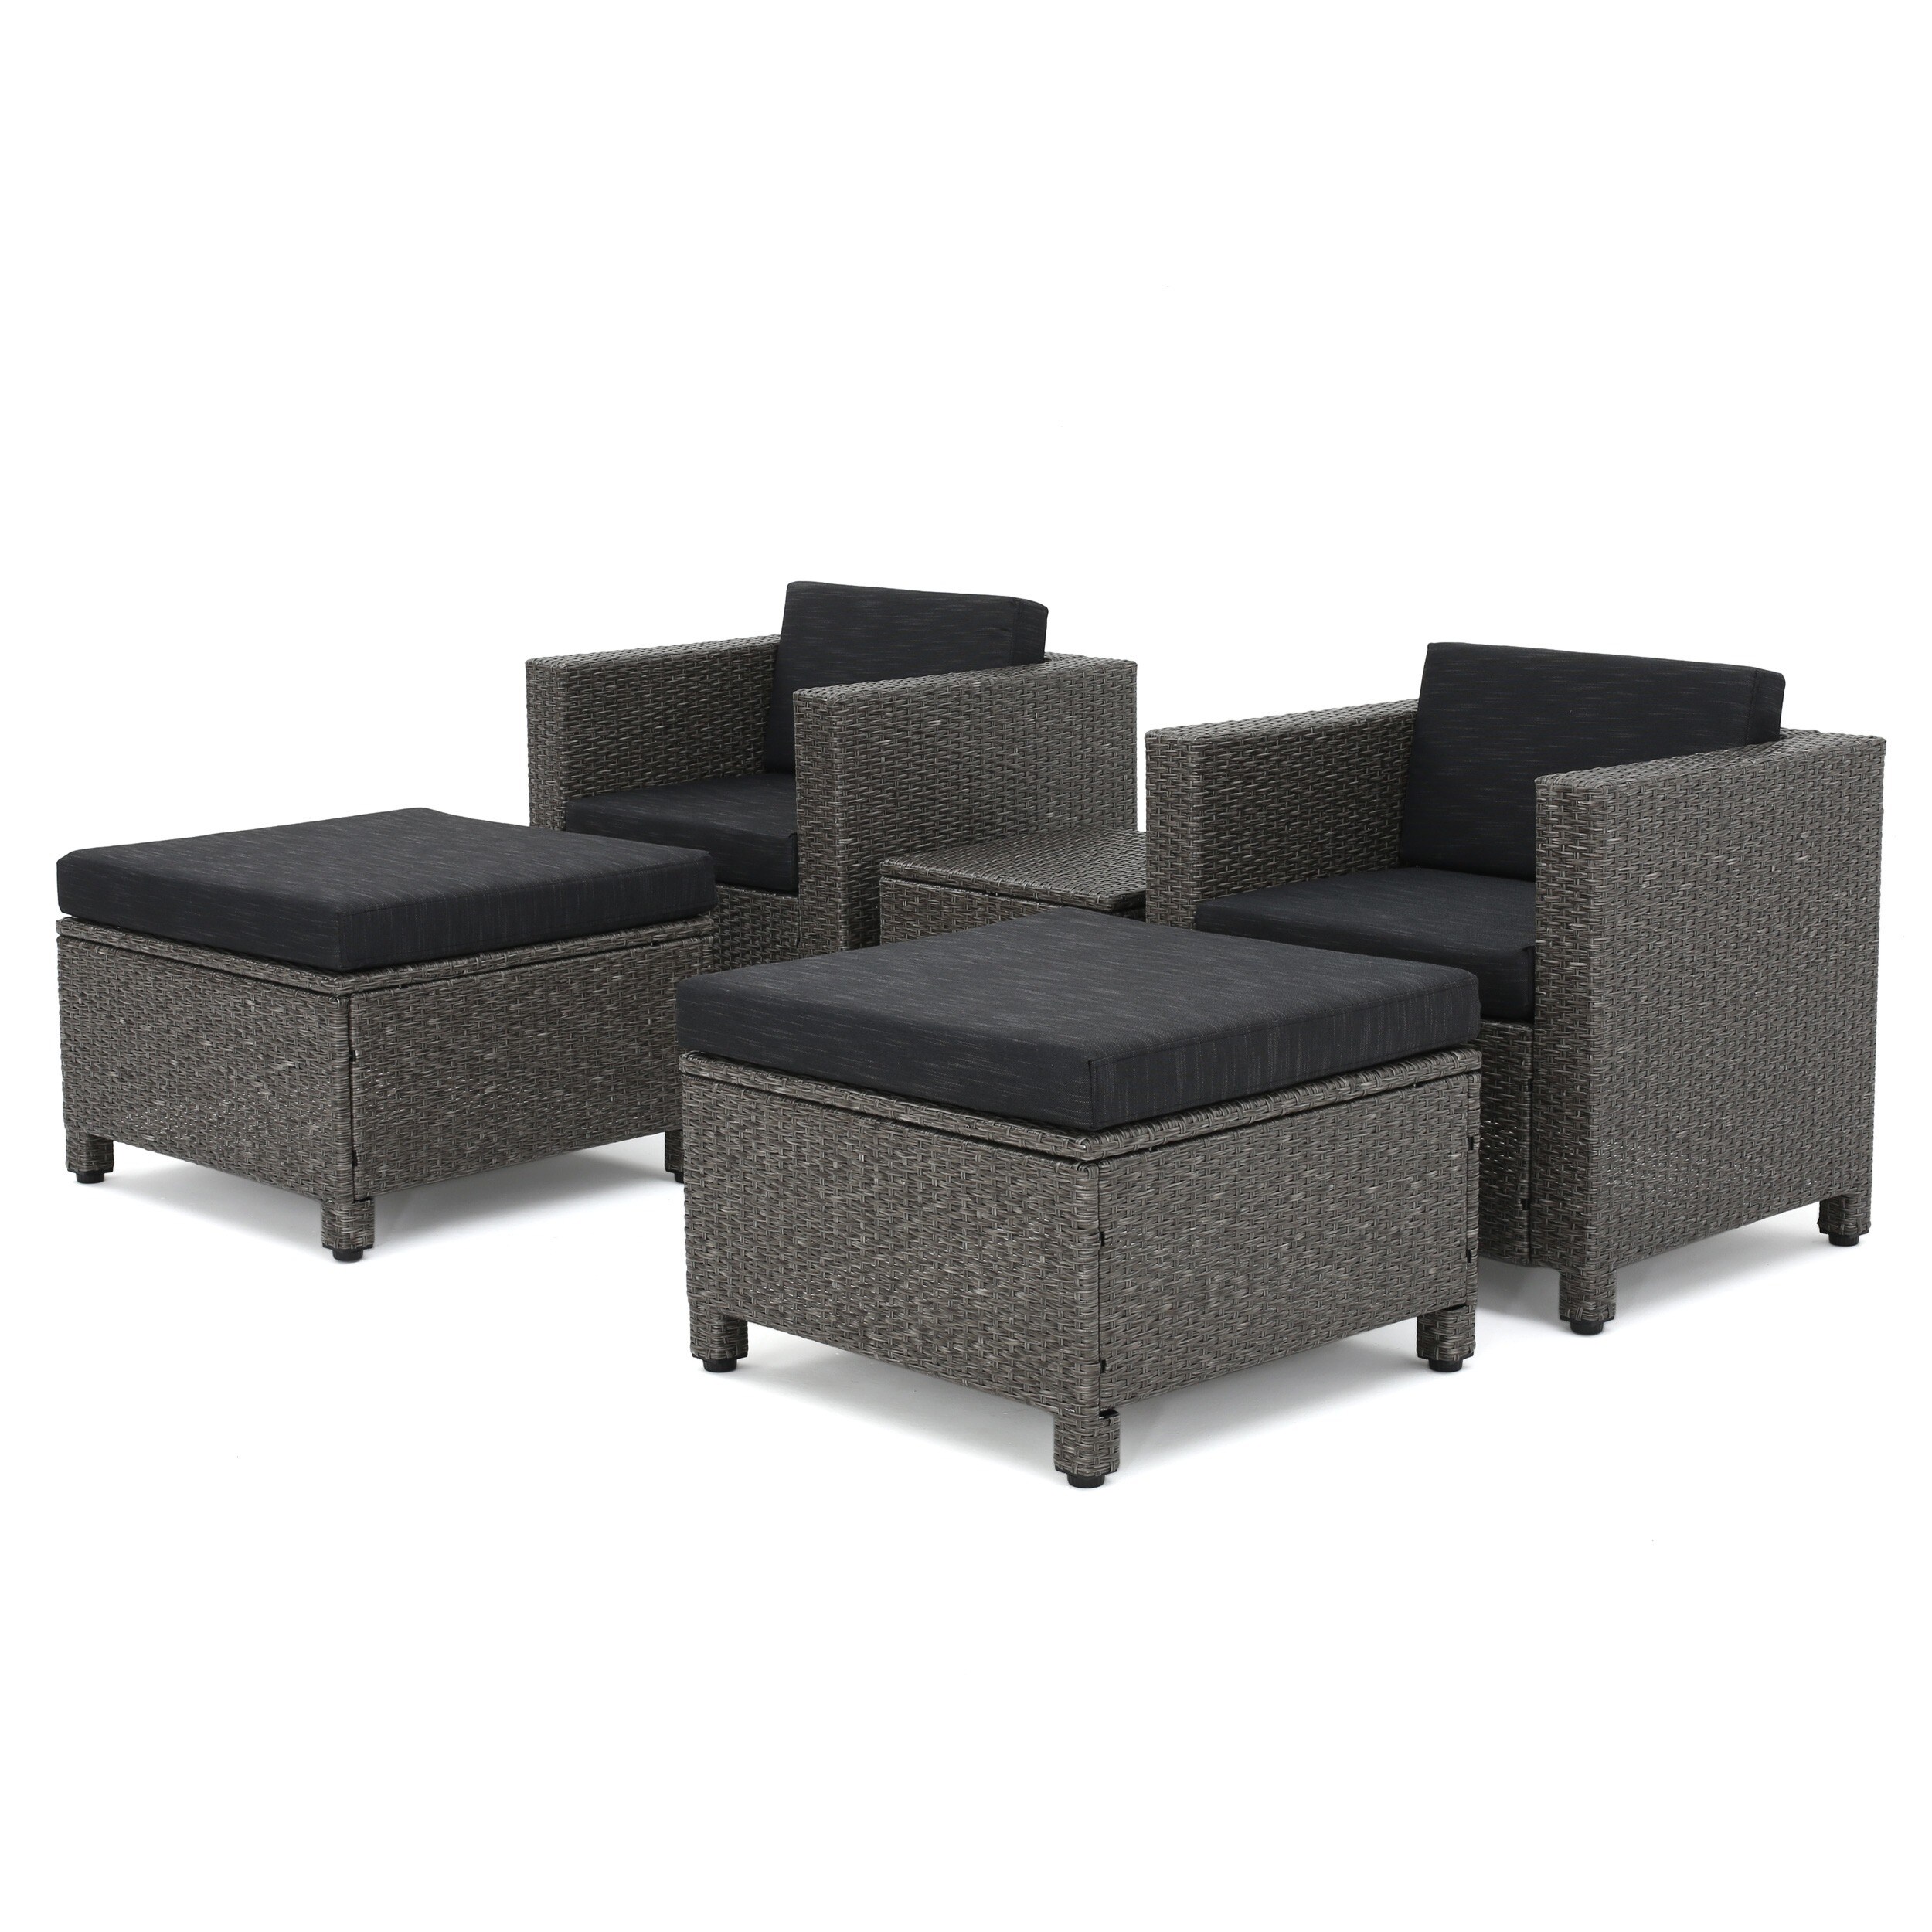 Puerta 5-piece Outdoor Wicker Chat Set with Water Resistant Cushions by Christopher Knight Home - Dark Brown Wicker with Beige Cushions